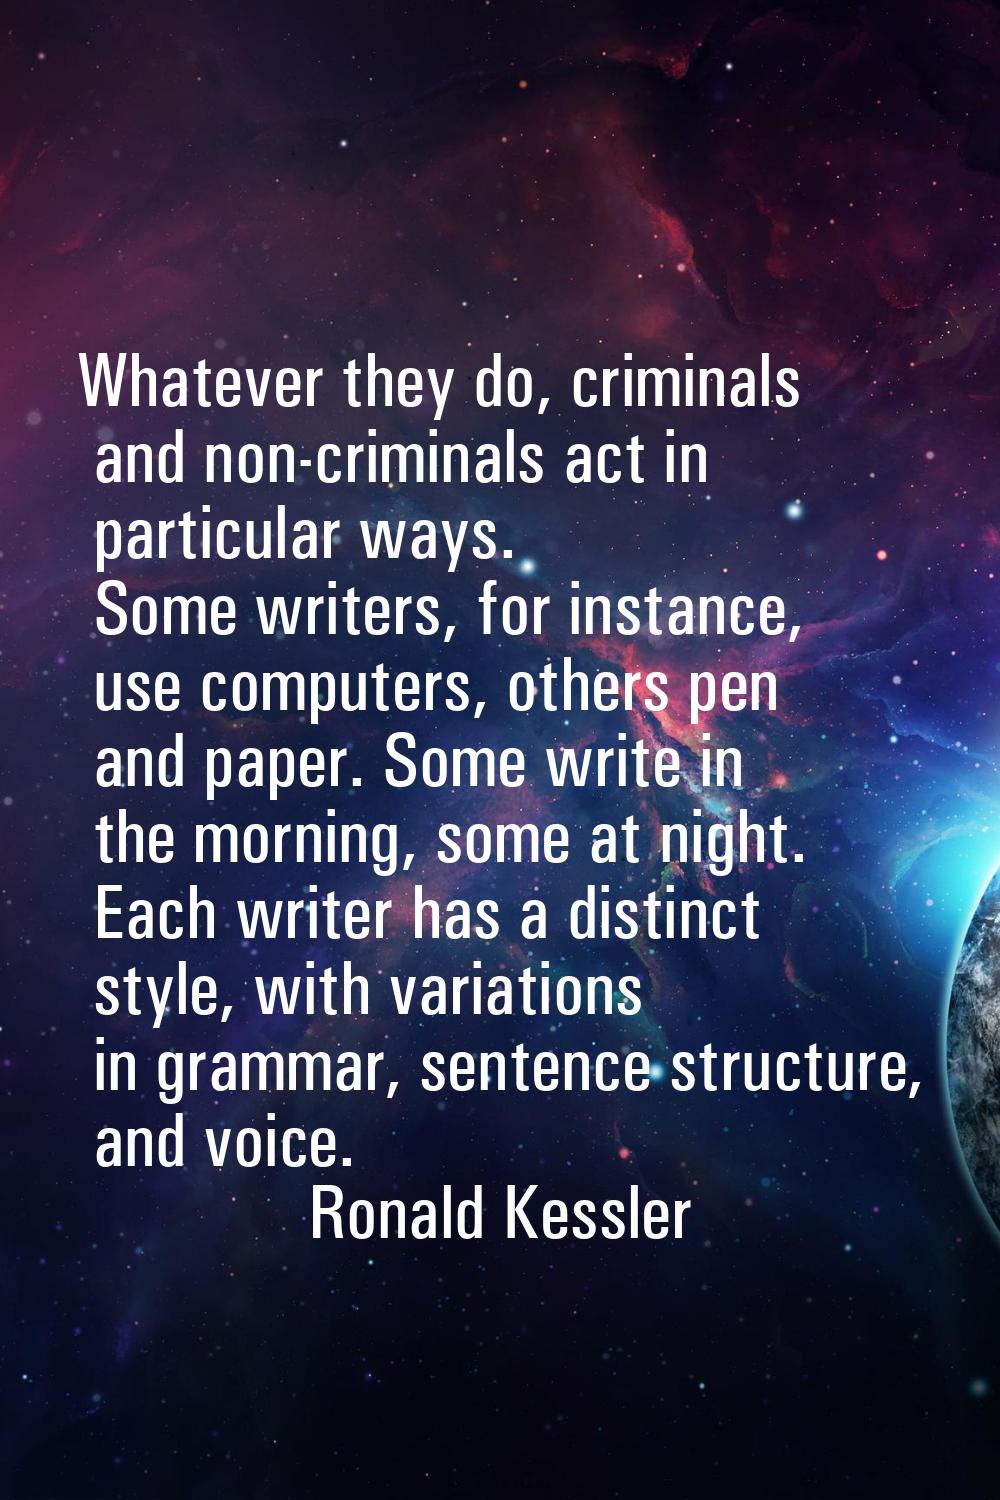 Whatever they do, criminals and non-criminals act in particular ways. Some writers, for instance, u